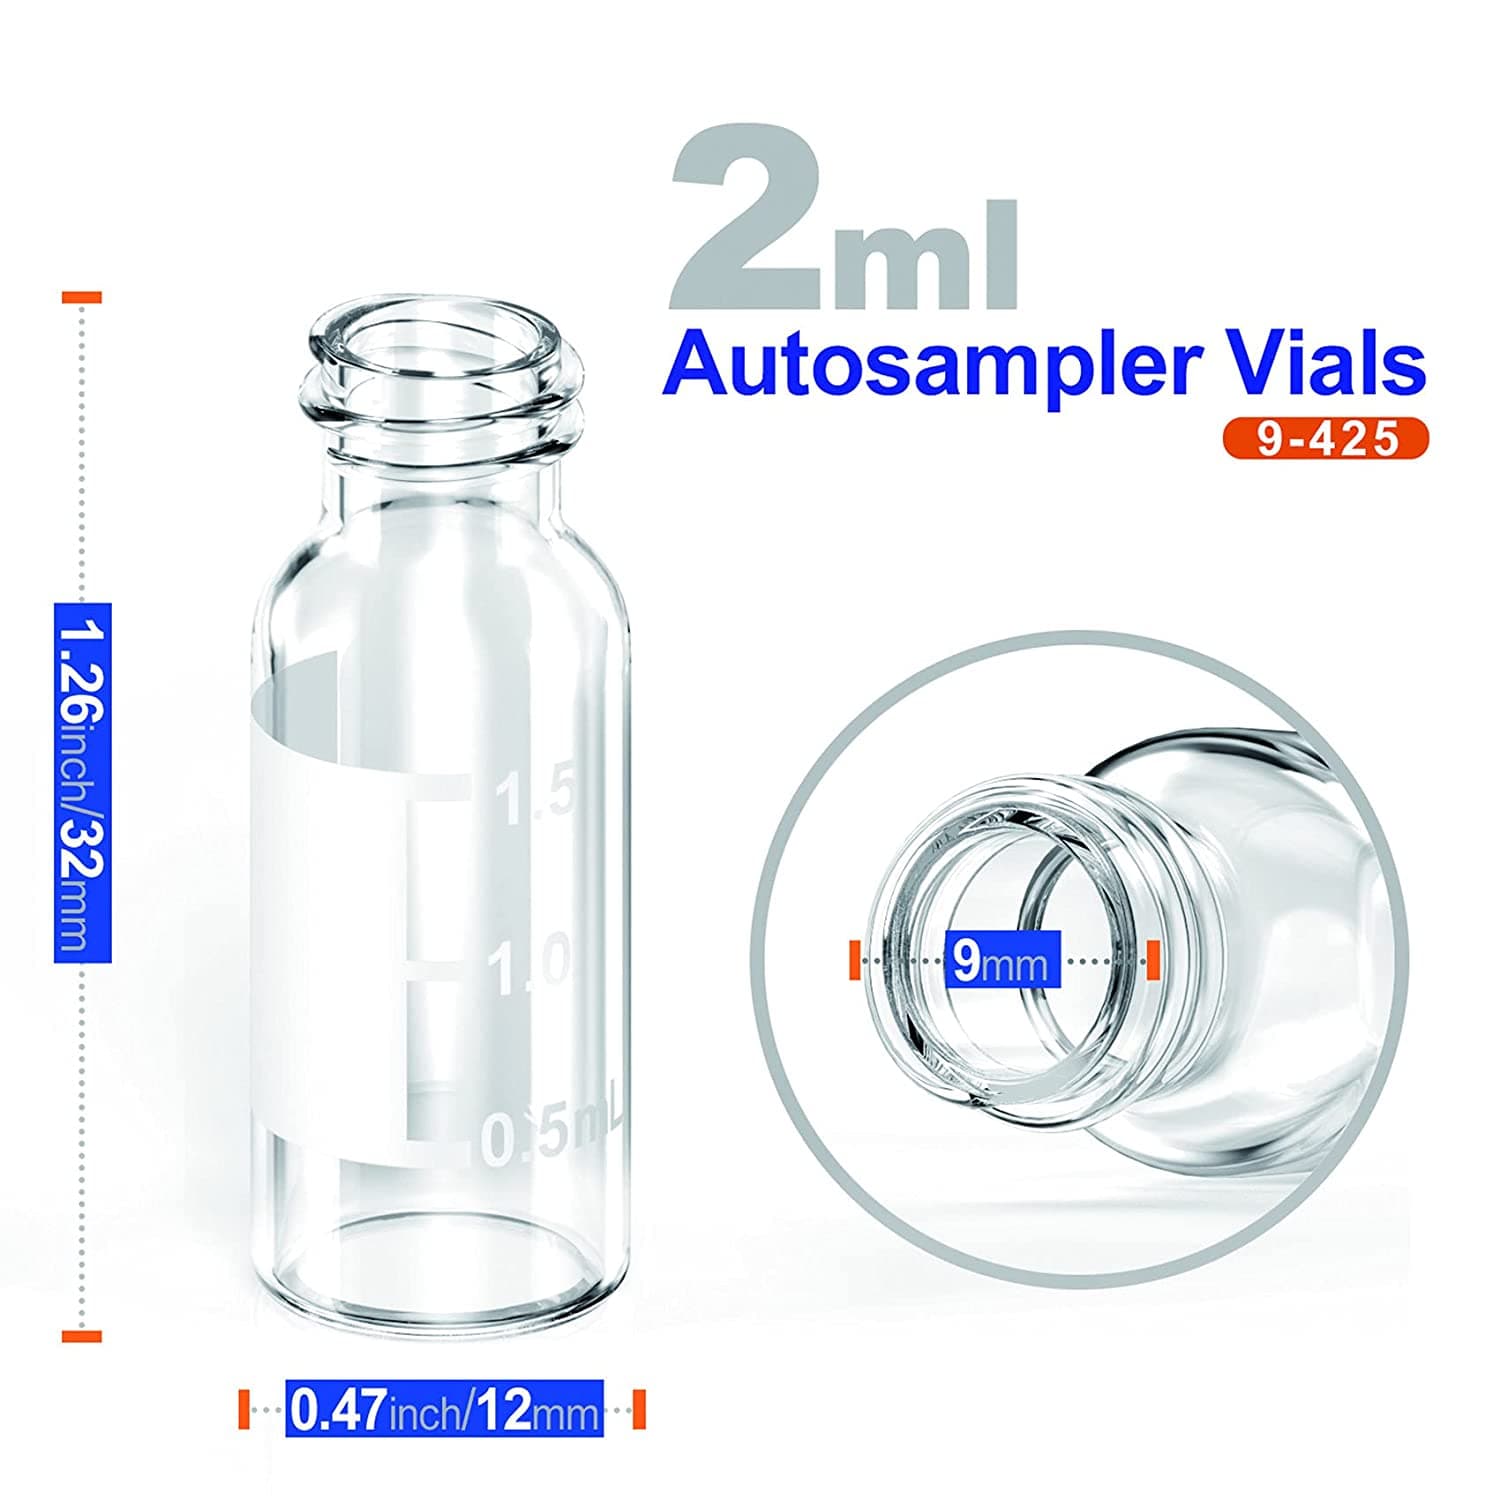 borosil 9-425 Screw top 2ml vials with inserts for HPLC sampling